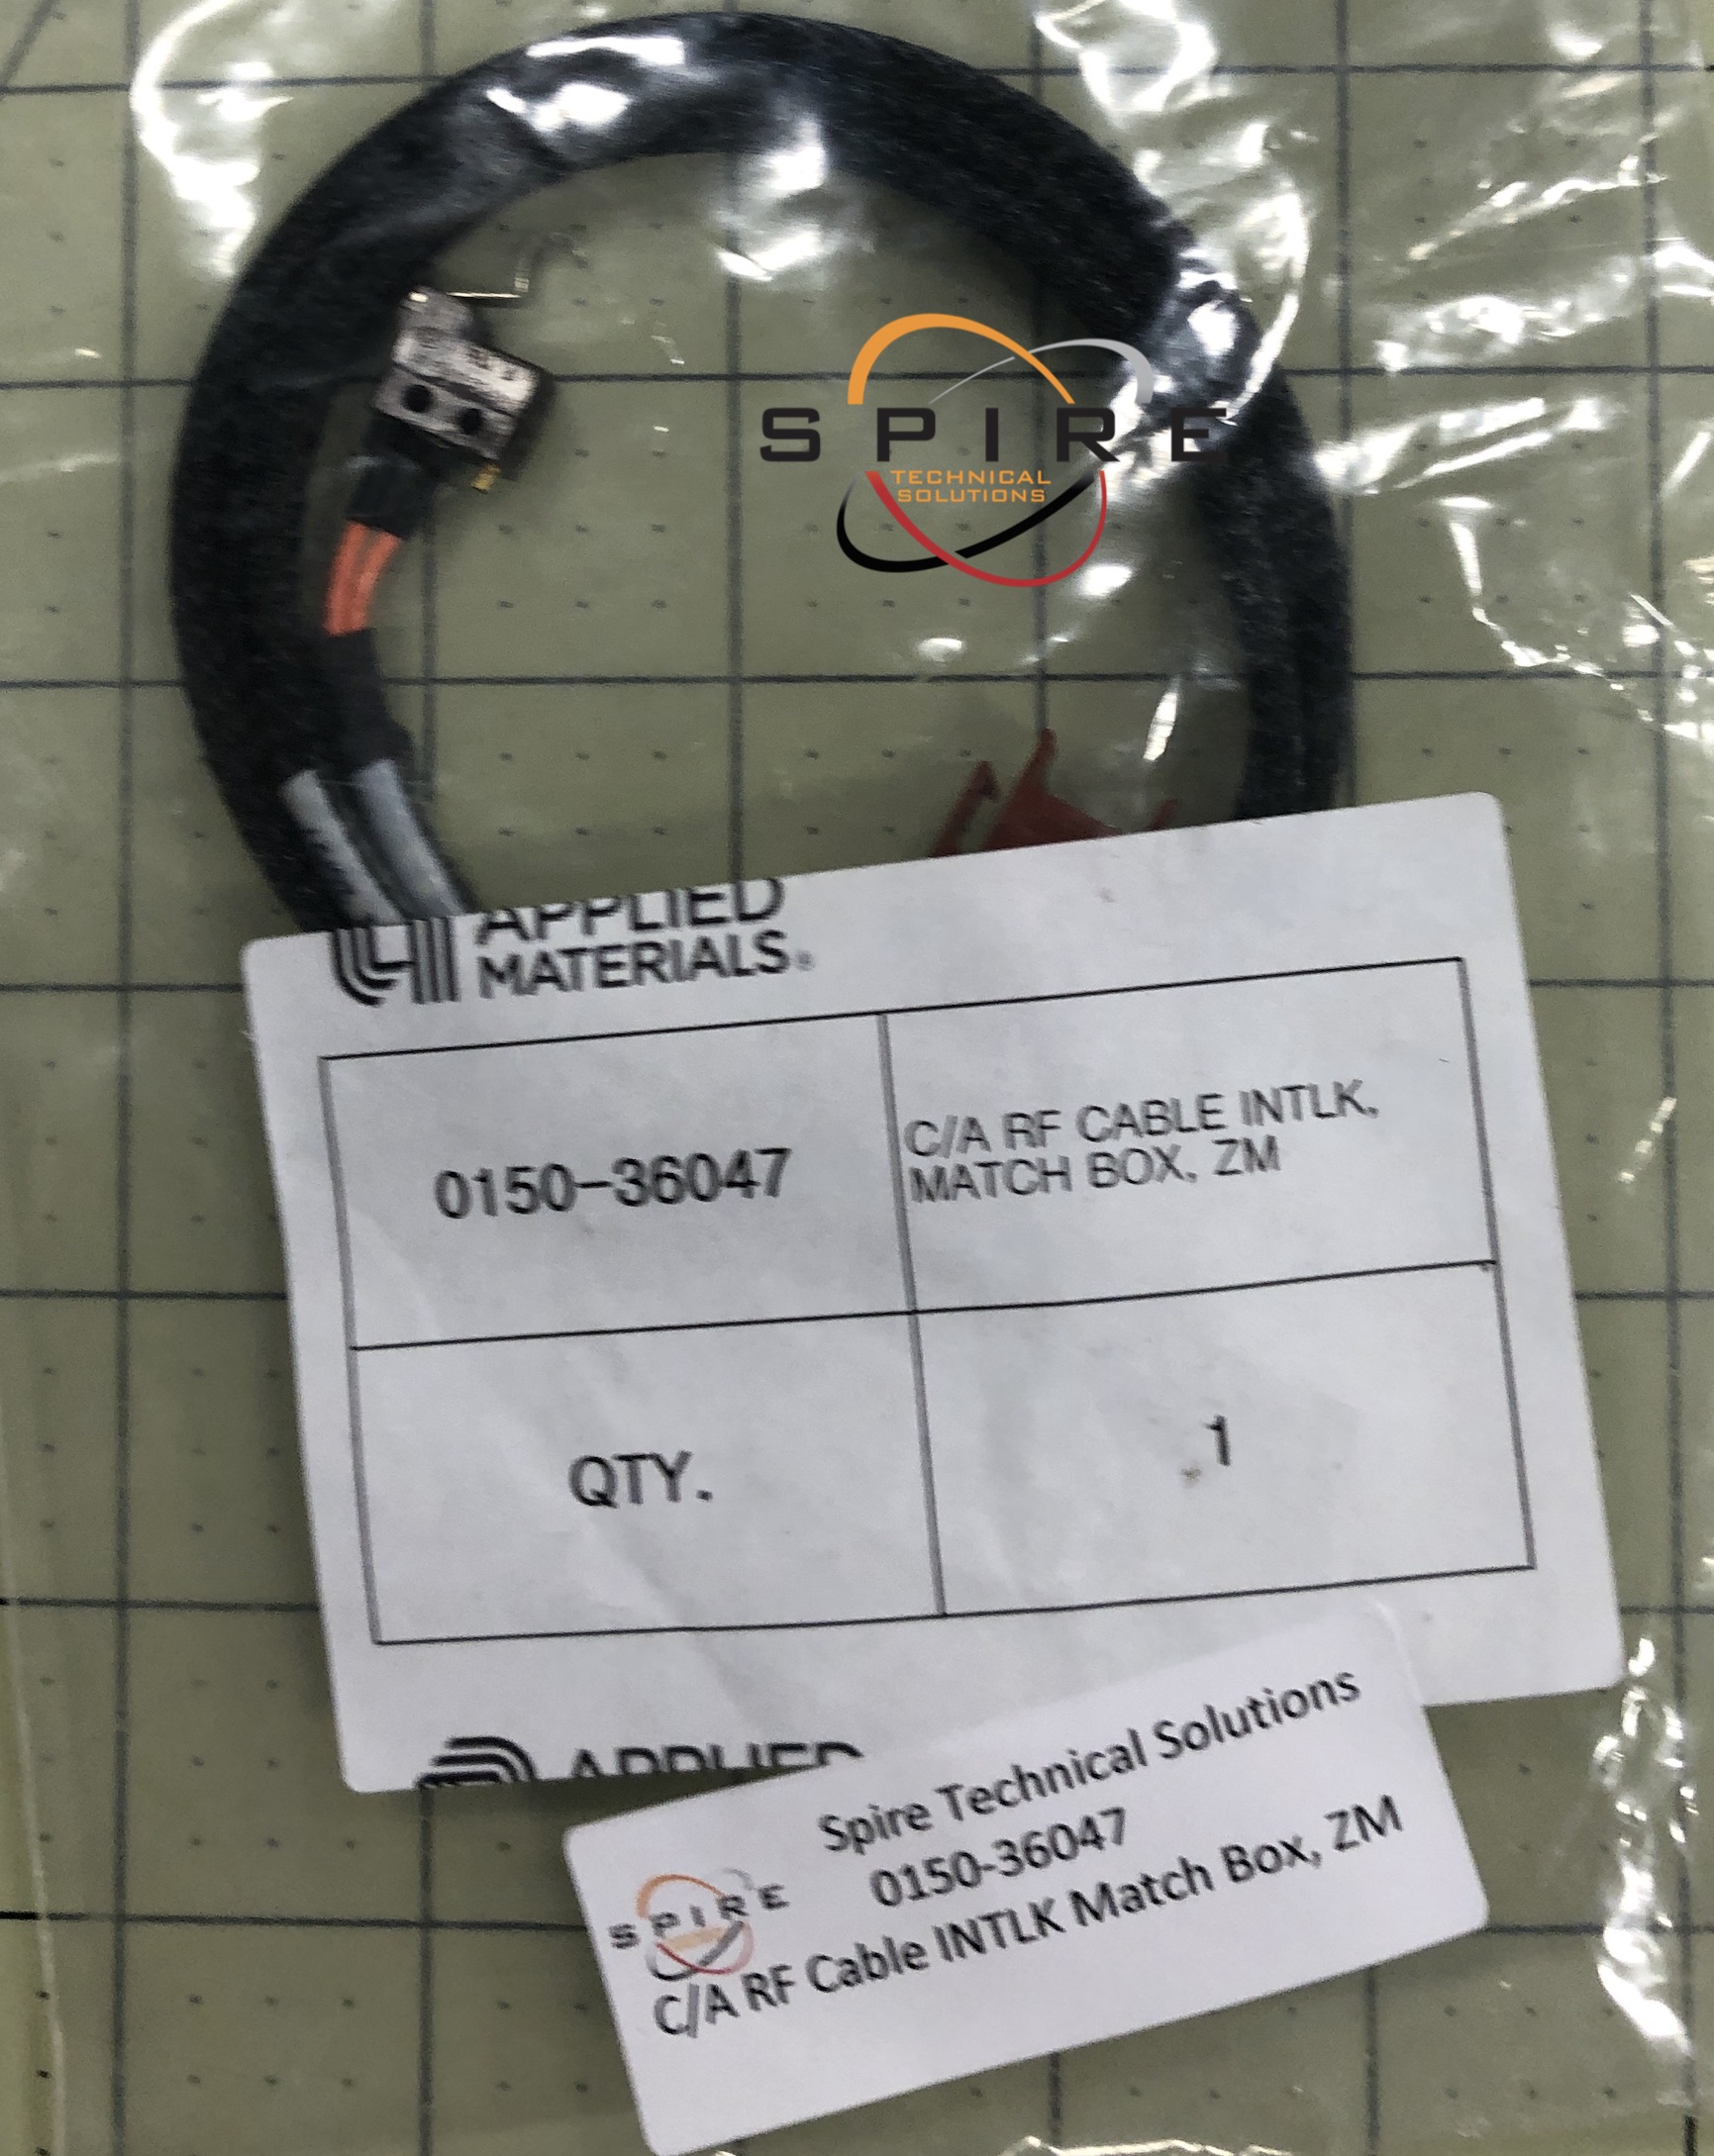 C/A RF Cable INTLK Match Box, ZM